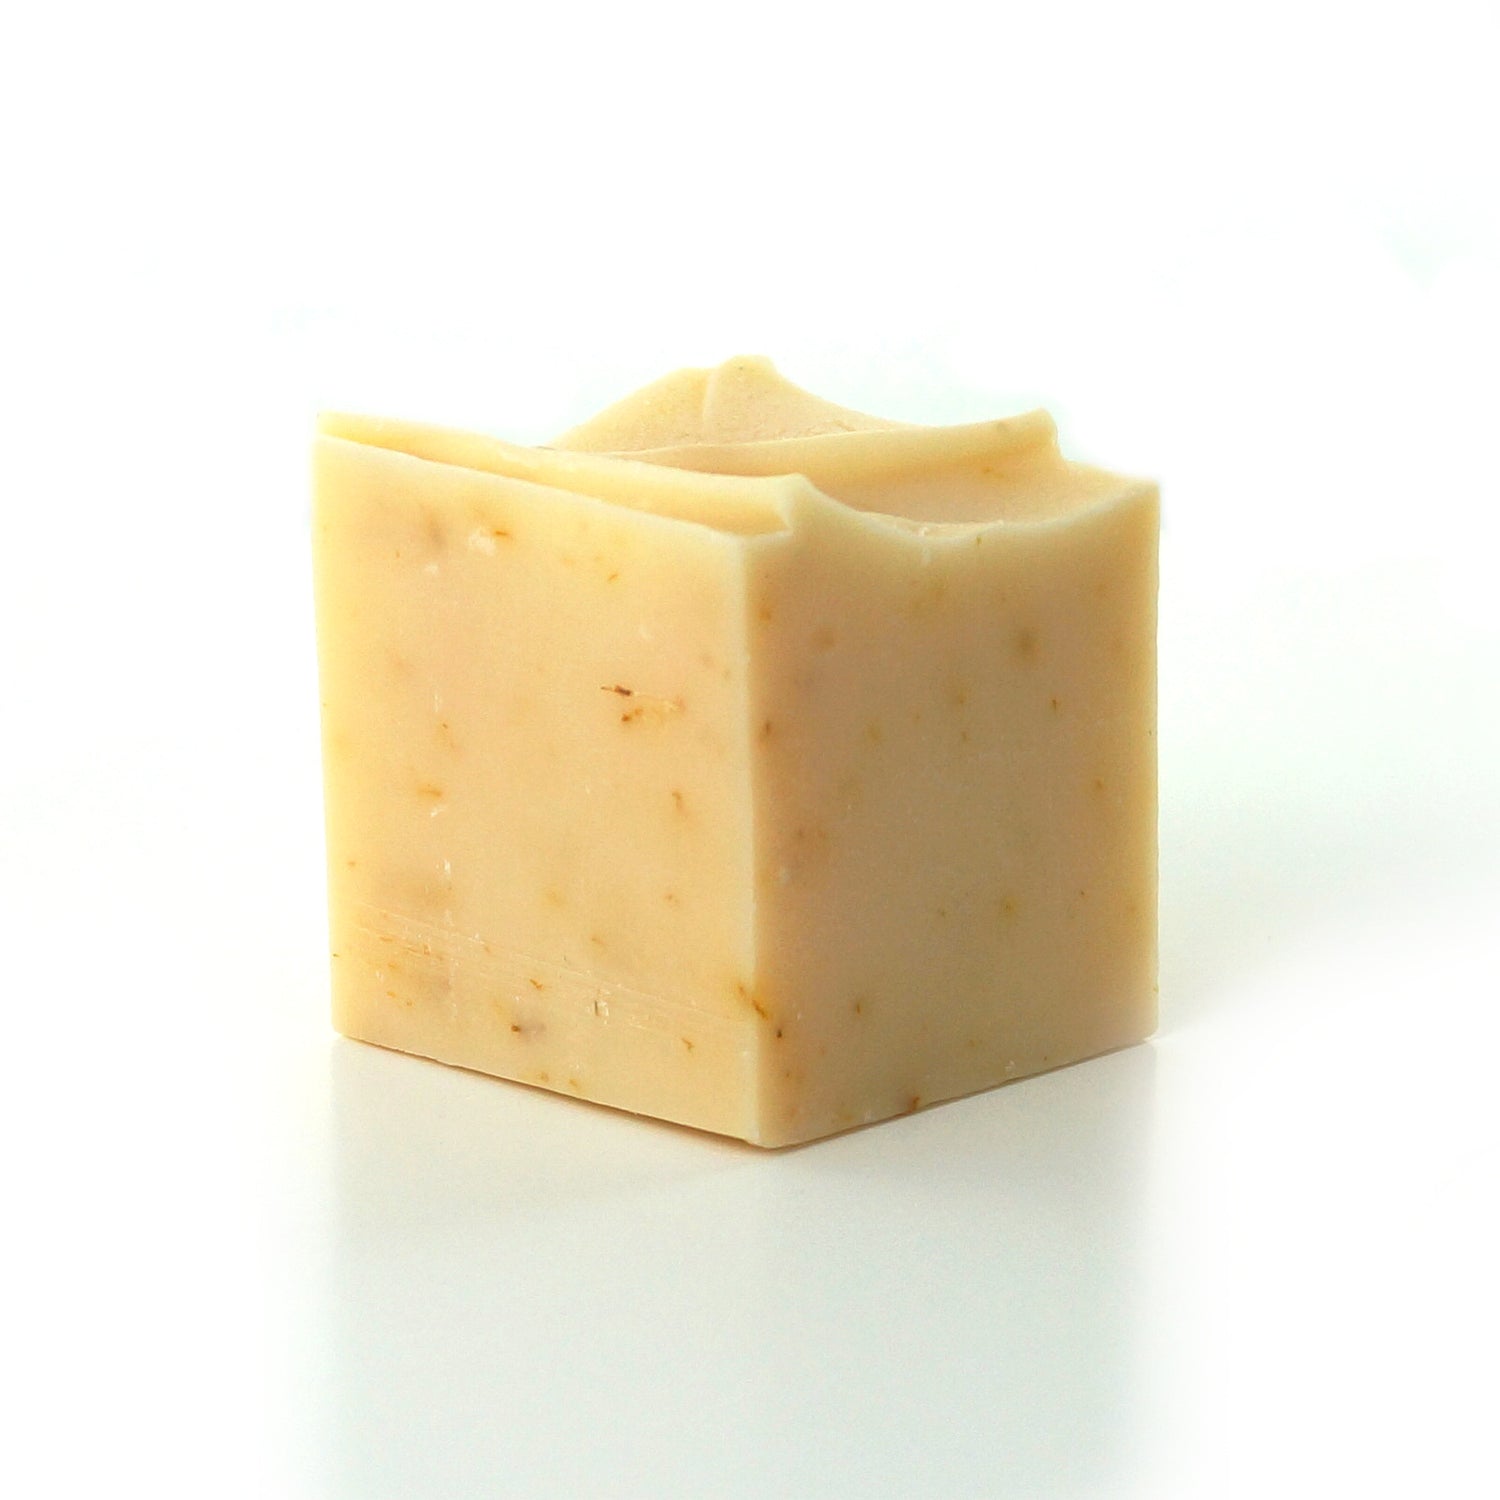 SUNFLOWER CITRUS Handcrafted Shea Soap